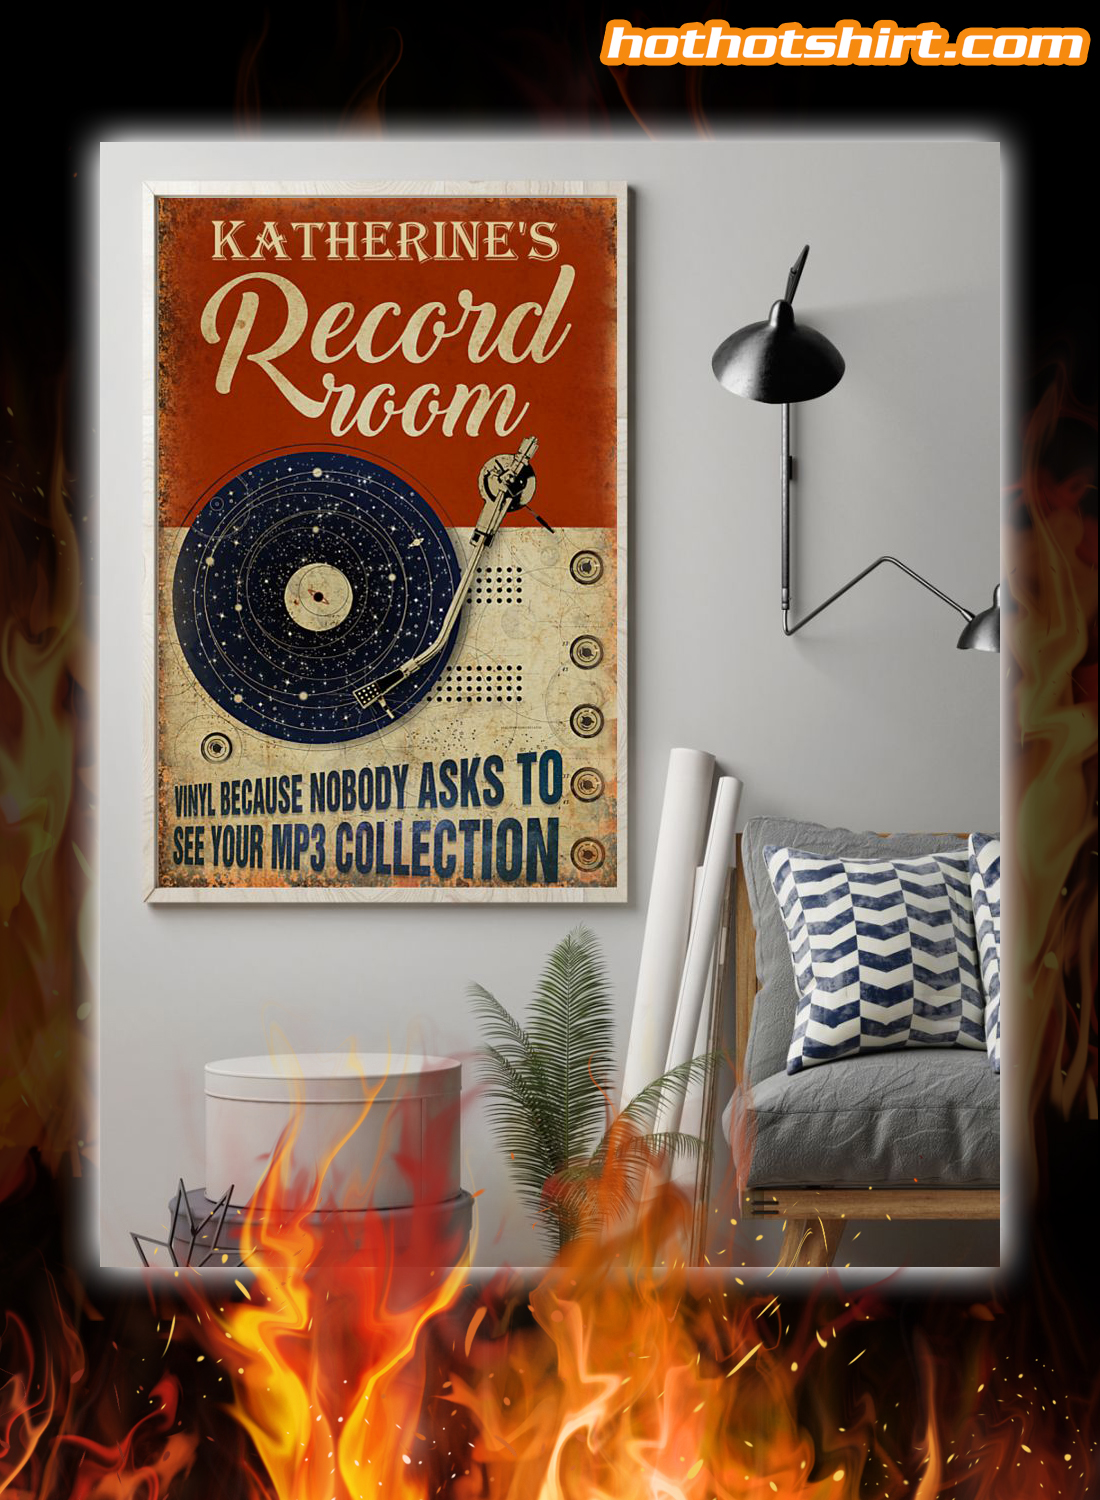 Vinyl Record Room because nobody asks to see mp3 collection personalized poster